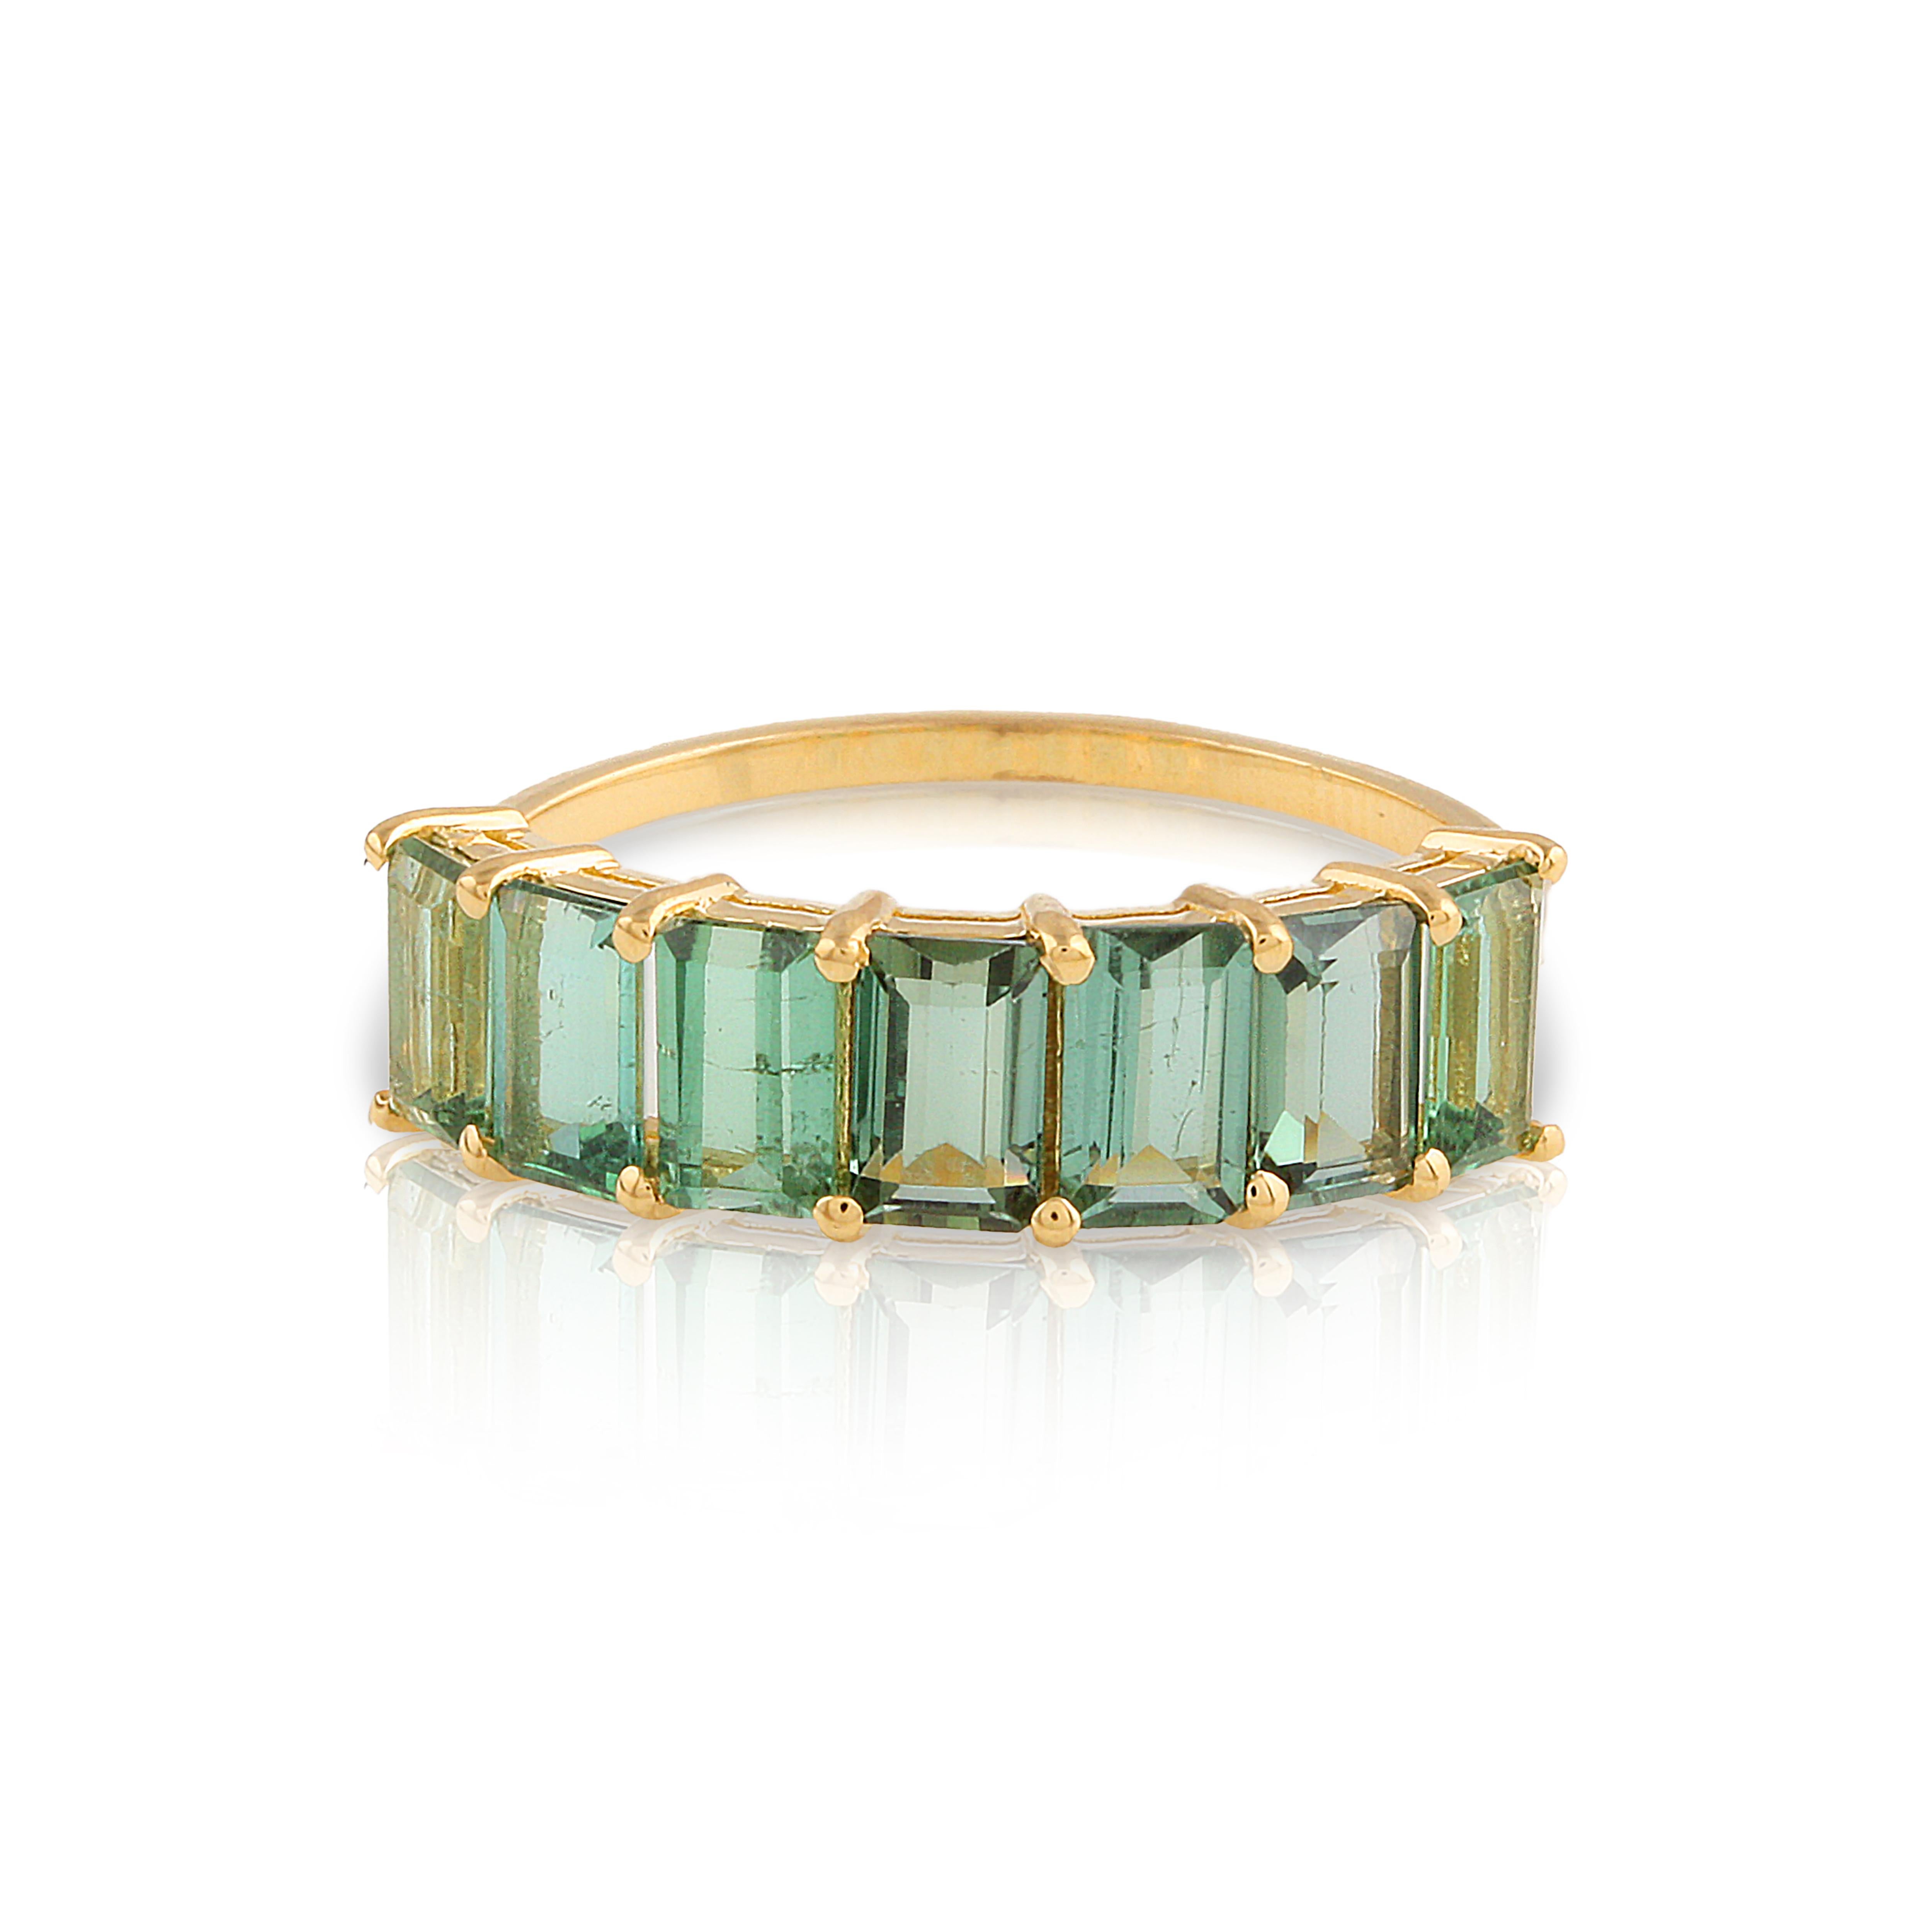 Tresor Beautiful Ring feature 2.00 carats of Green Tourmaline. The Ring are an ode to the luxurious yet classic beauty with sparkly gemstones and feminine hues. Their contemporary and modern design make them perfect and versatile to be worn at any